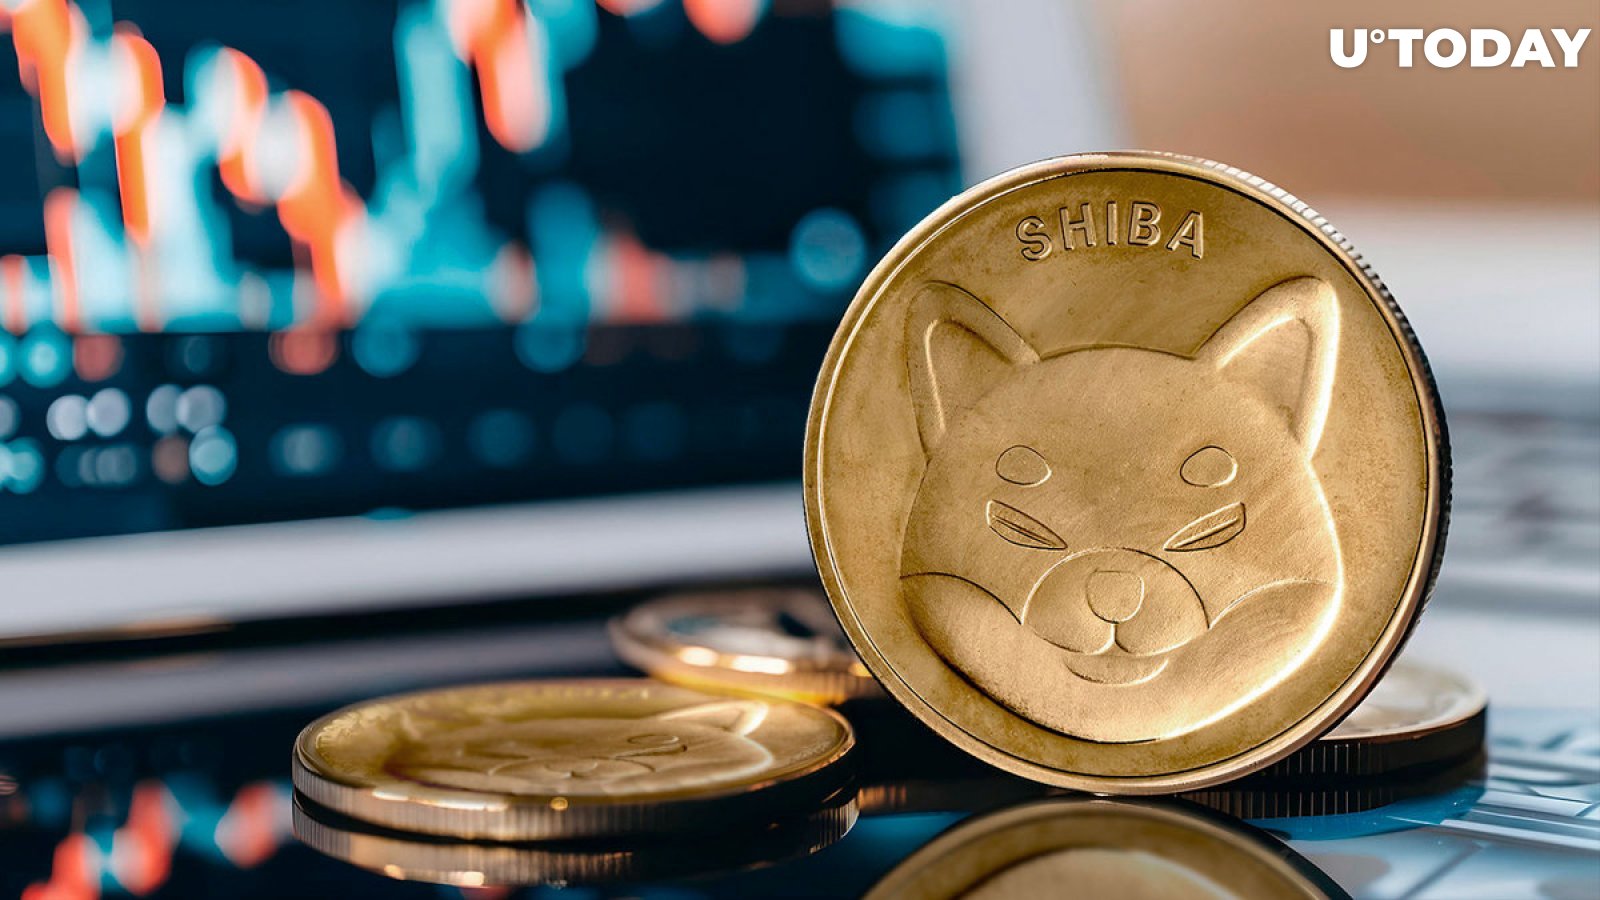 Shiba Inu (SHIB) Surges 3,015% in NetFlow Spike, but There’s Catch